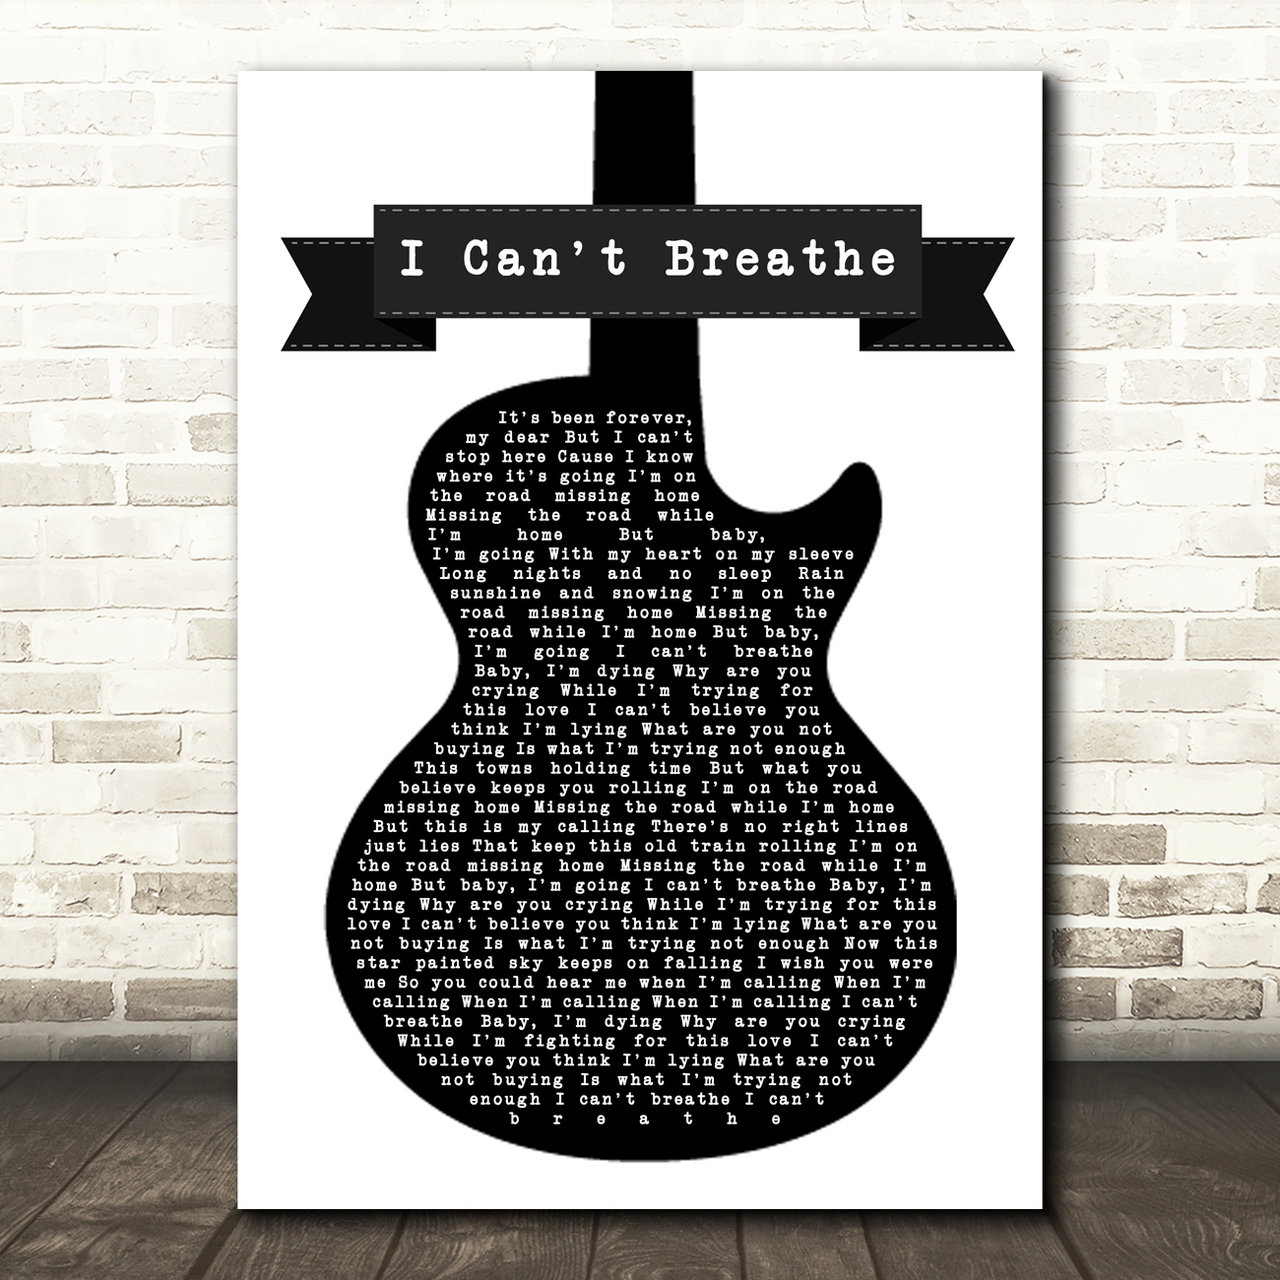 Parker McCollum I Can't Breathe Black & White Guitar Song Lyric Quote Music Poster Print